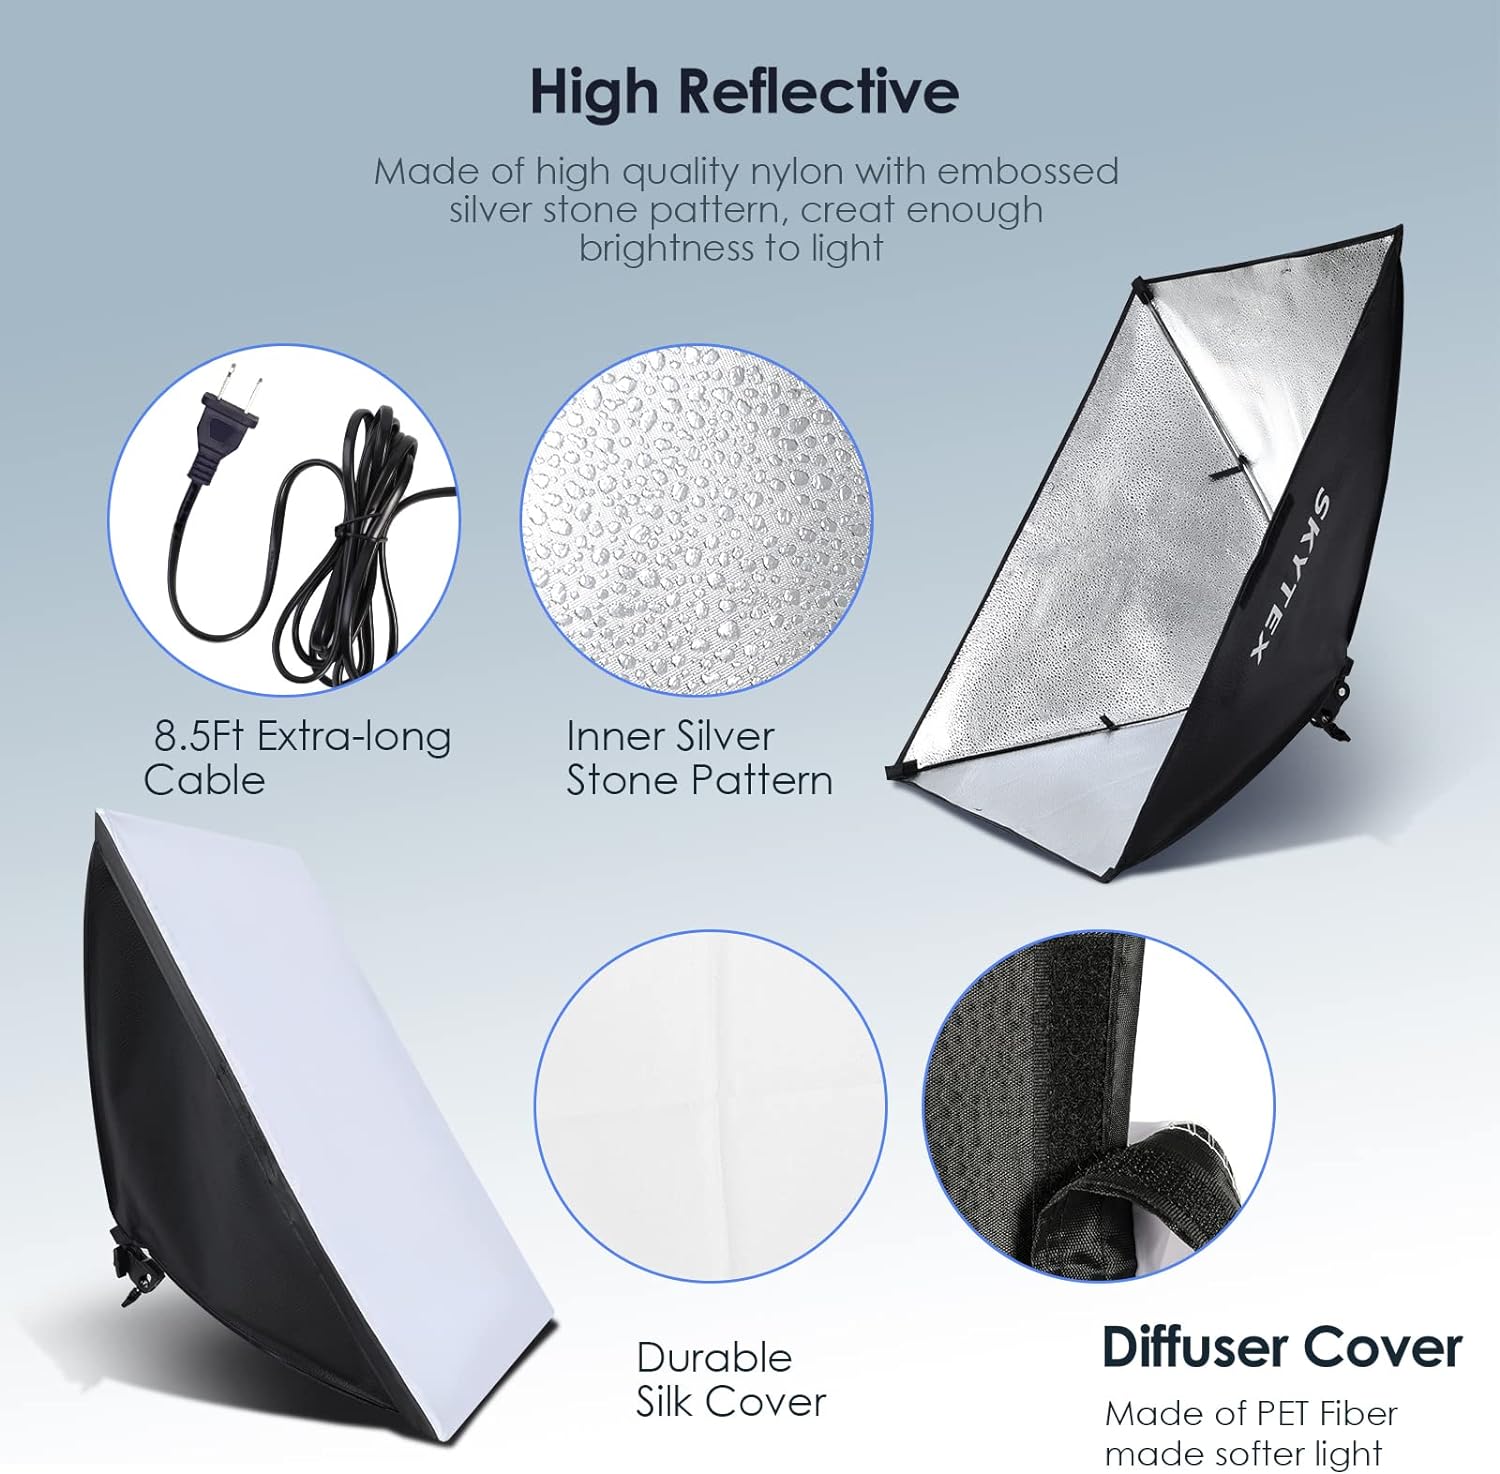 Softbox Lighting Kit, skytex Continuous Photography Lighting Kit with 2x20x28in Soft Box | 2X 85W 2700-6400K E27 LED Bulb, Photo Studio Lights Equipment for Camera Shooting, Video Recording…